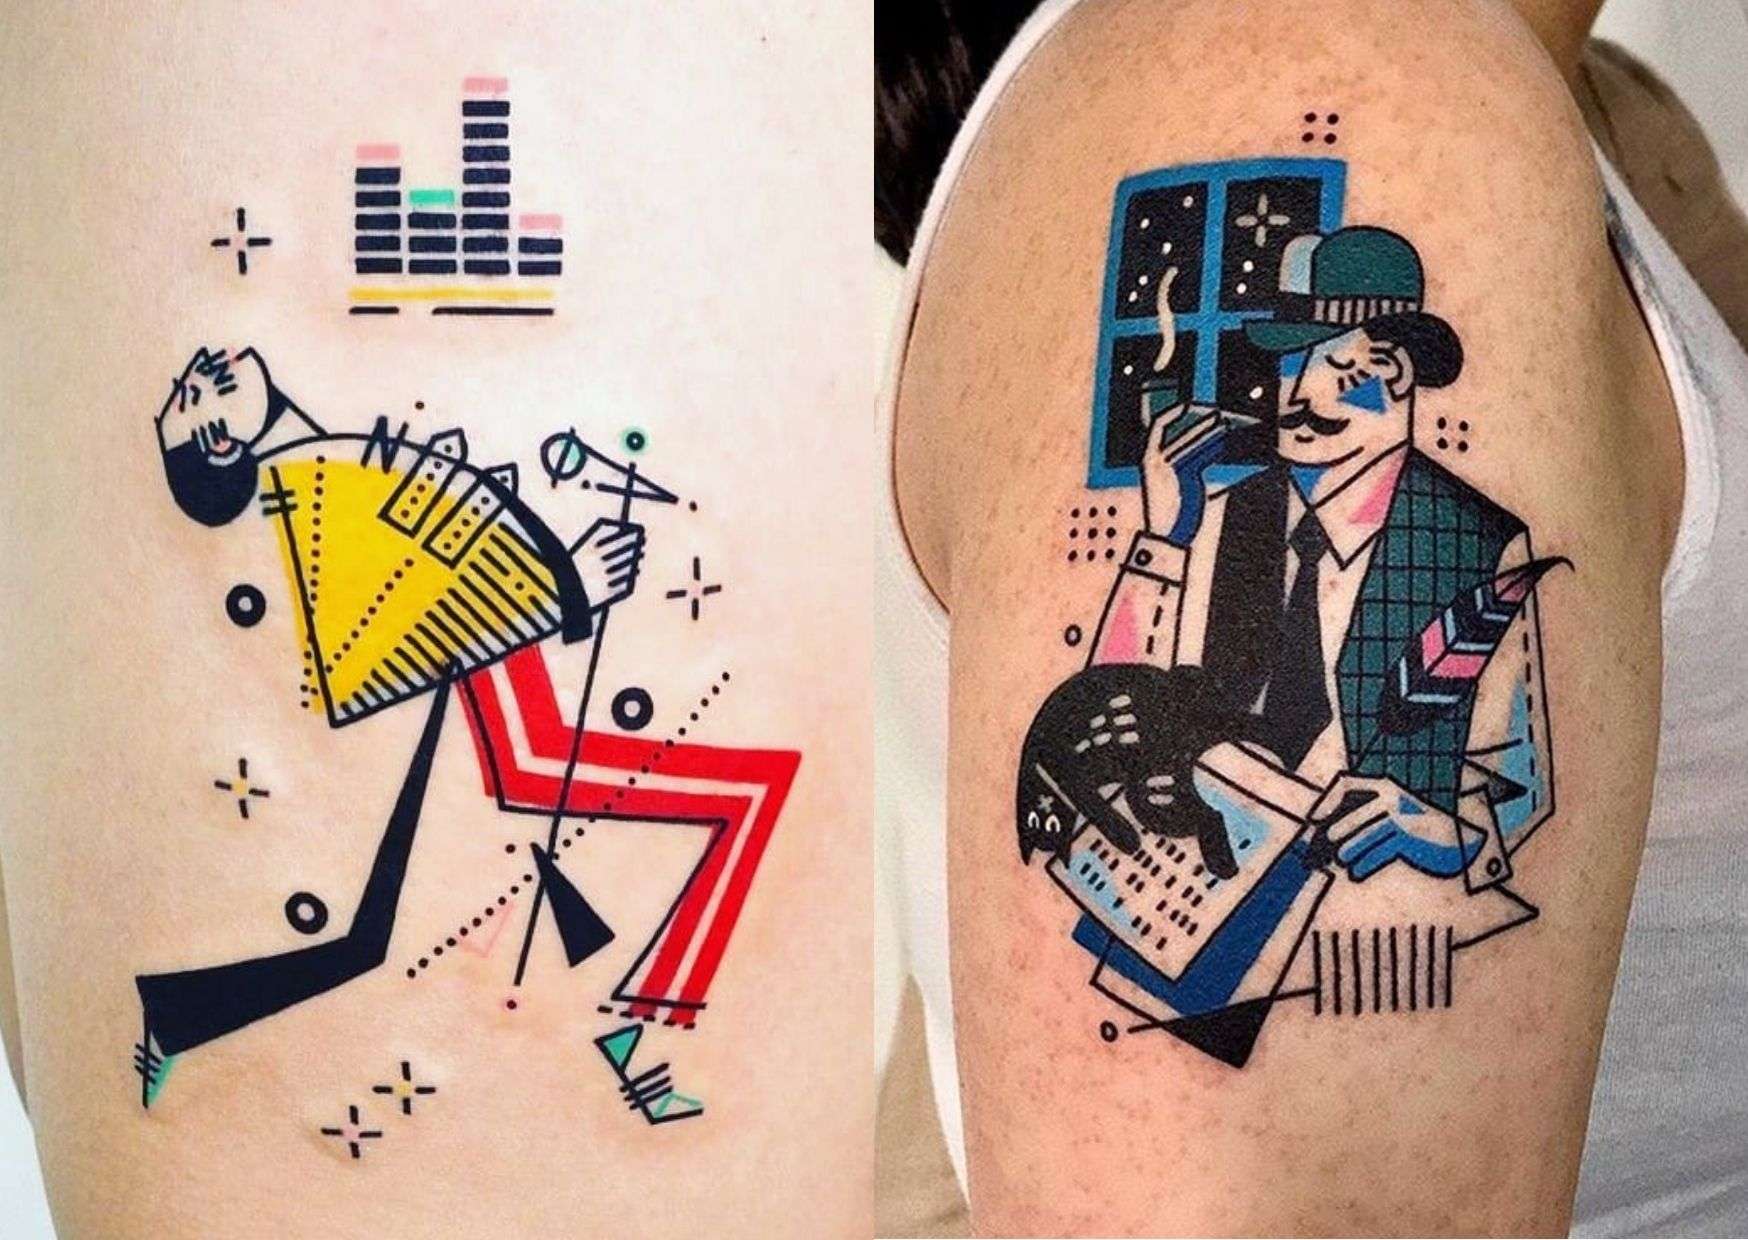 Tattooing With A Minimal Background To Retain The ‘Comic’ Nature